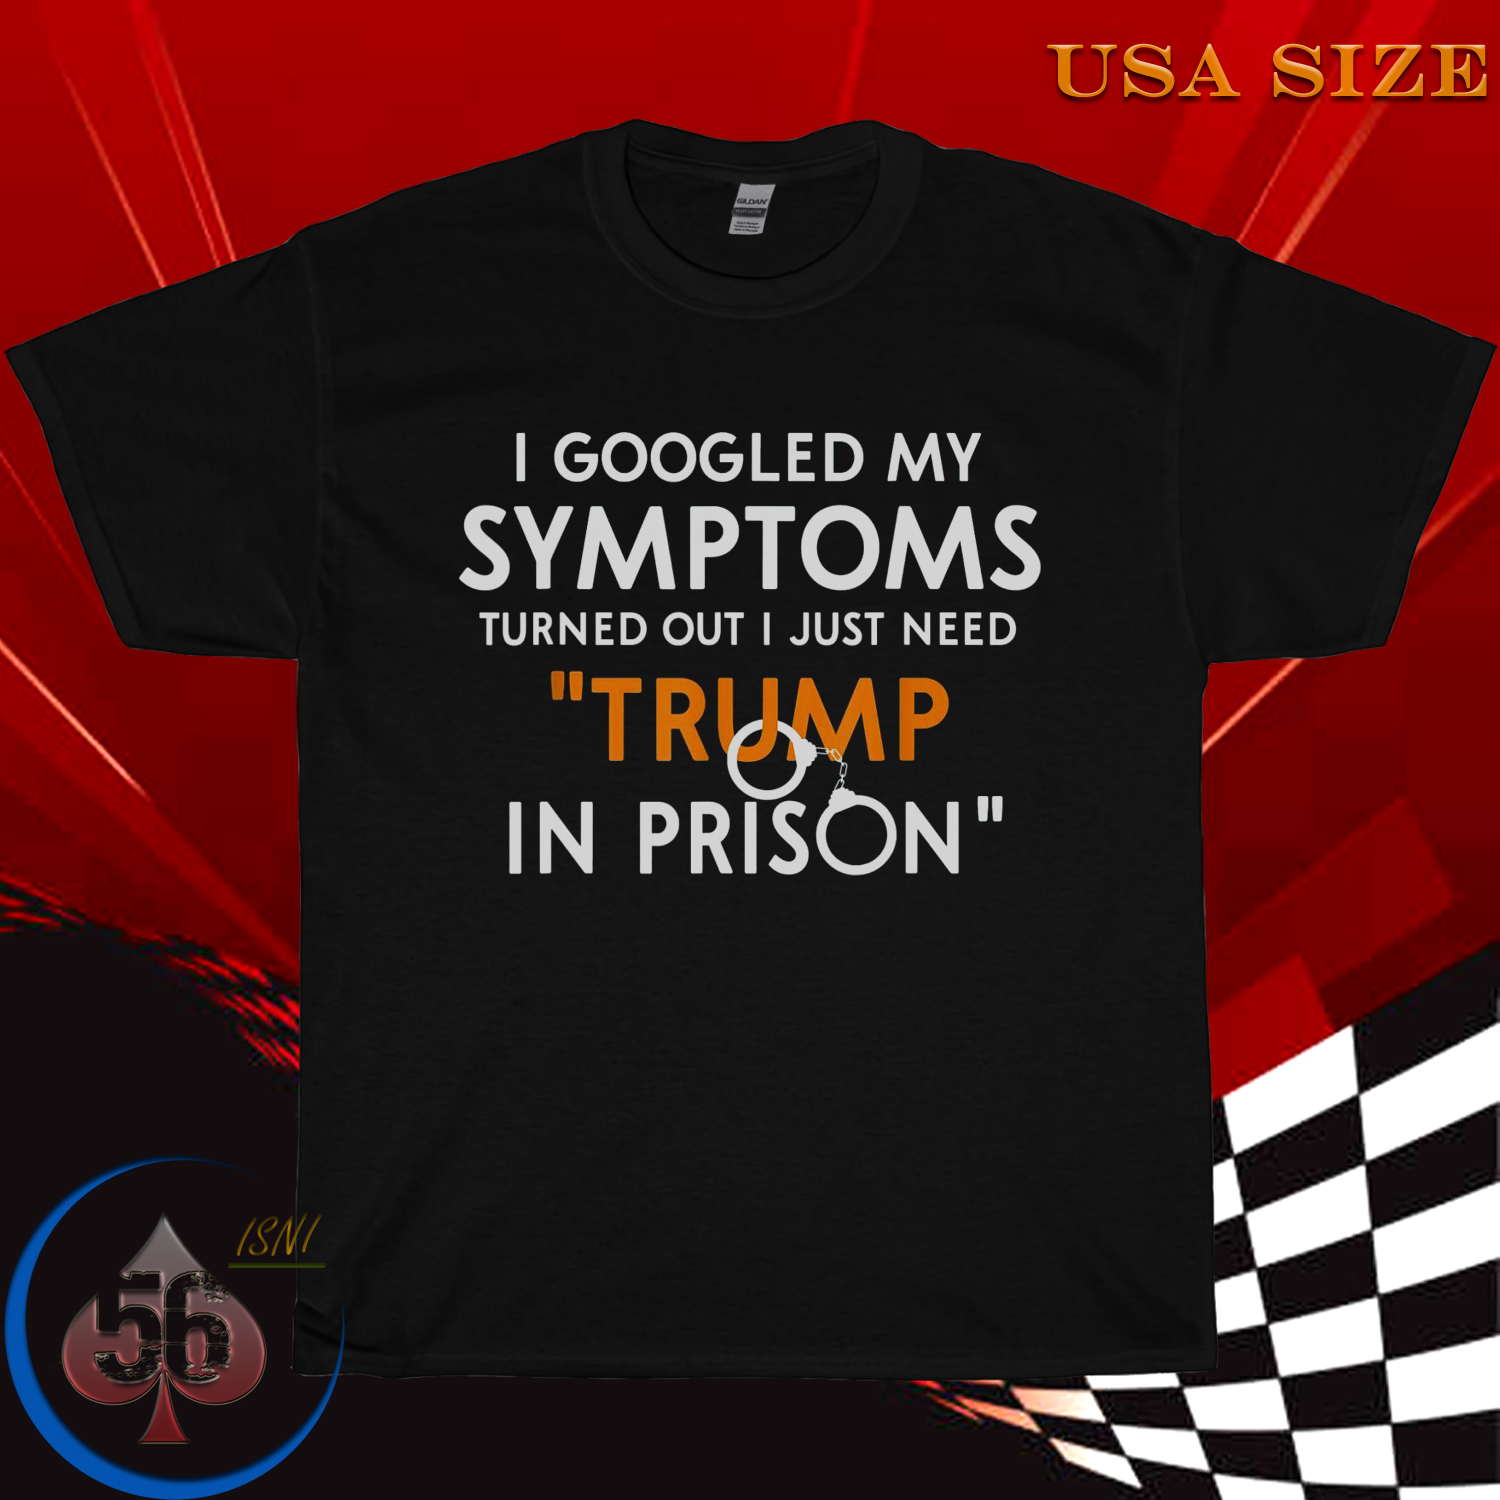 I Googled My Symptoms Turns Out I Just Need Trump In Prison T-Shirt